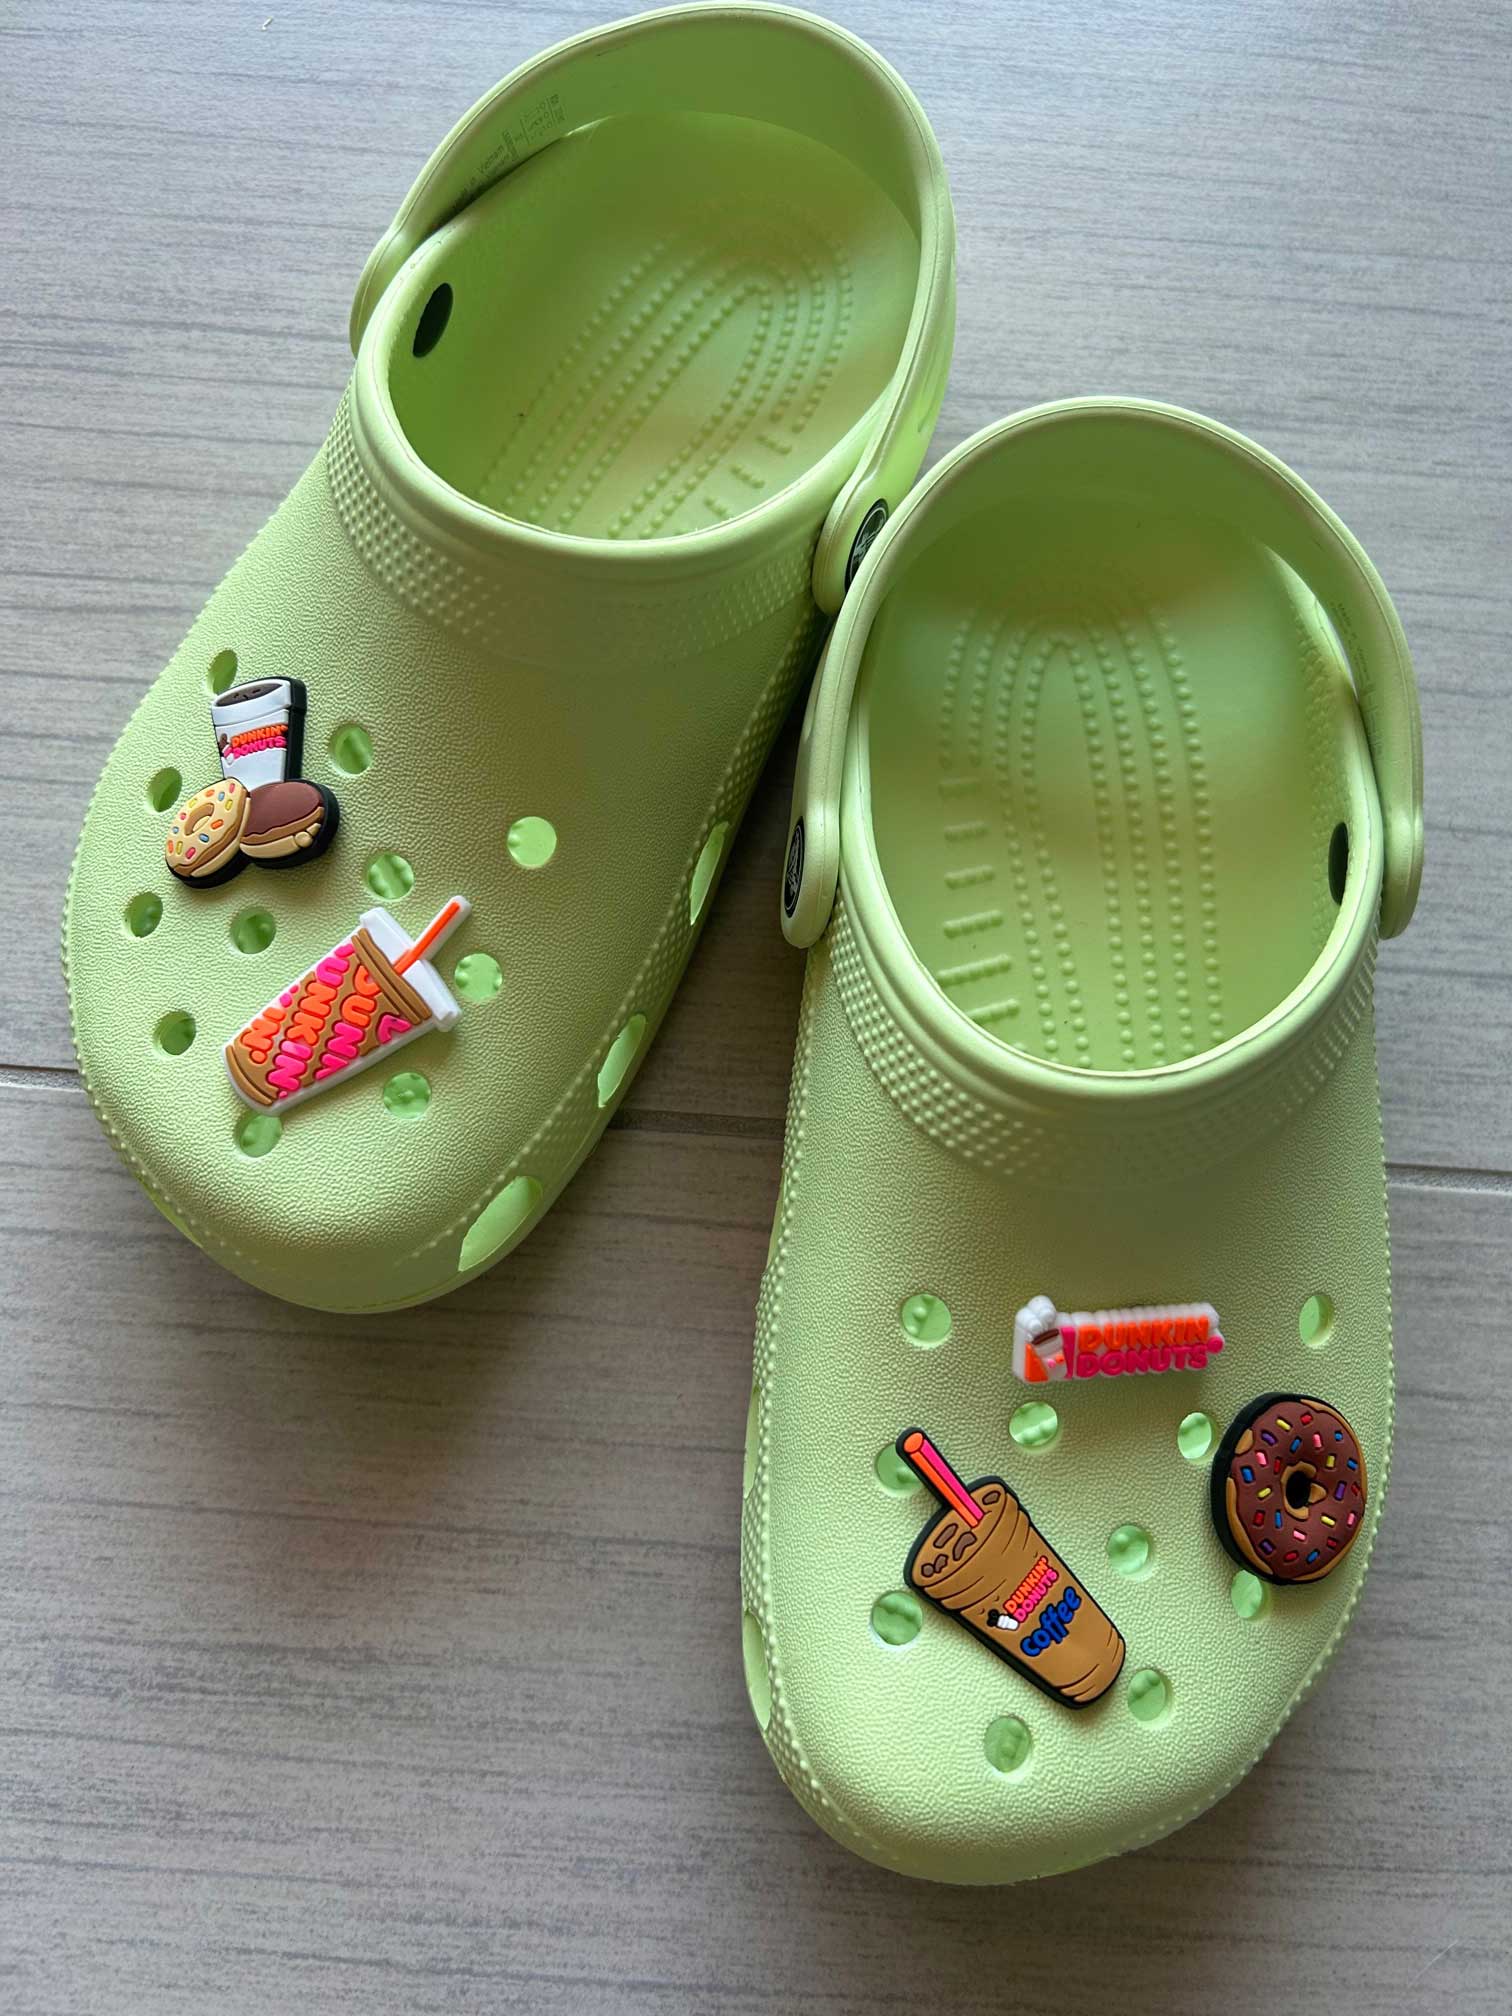 Pin by toribaby on feeties  Crocs fashion, Crocs with charms, Girly shoes